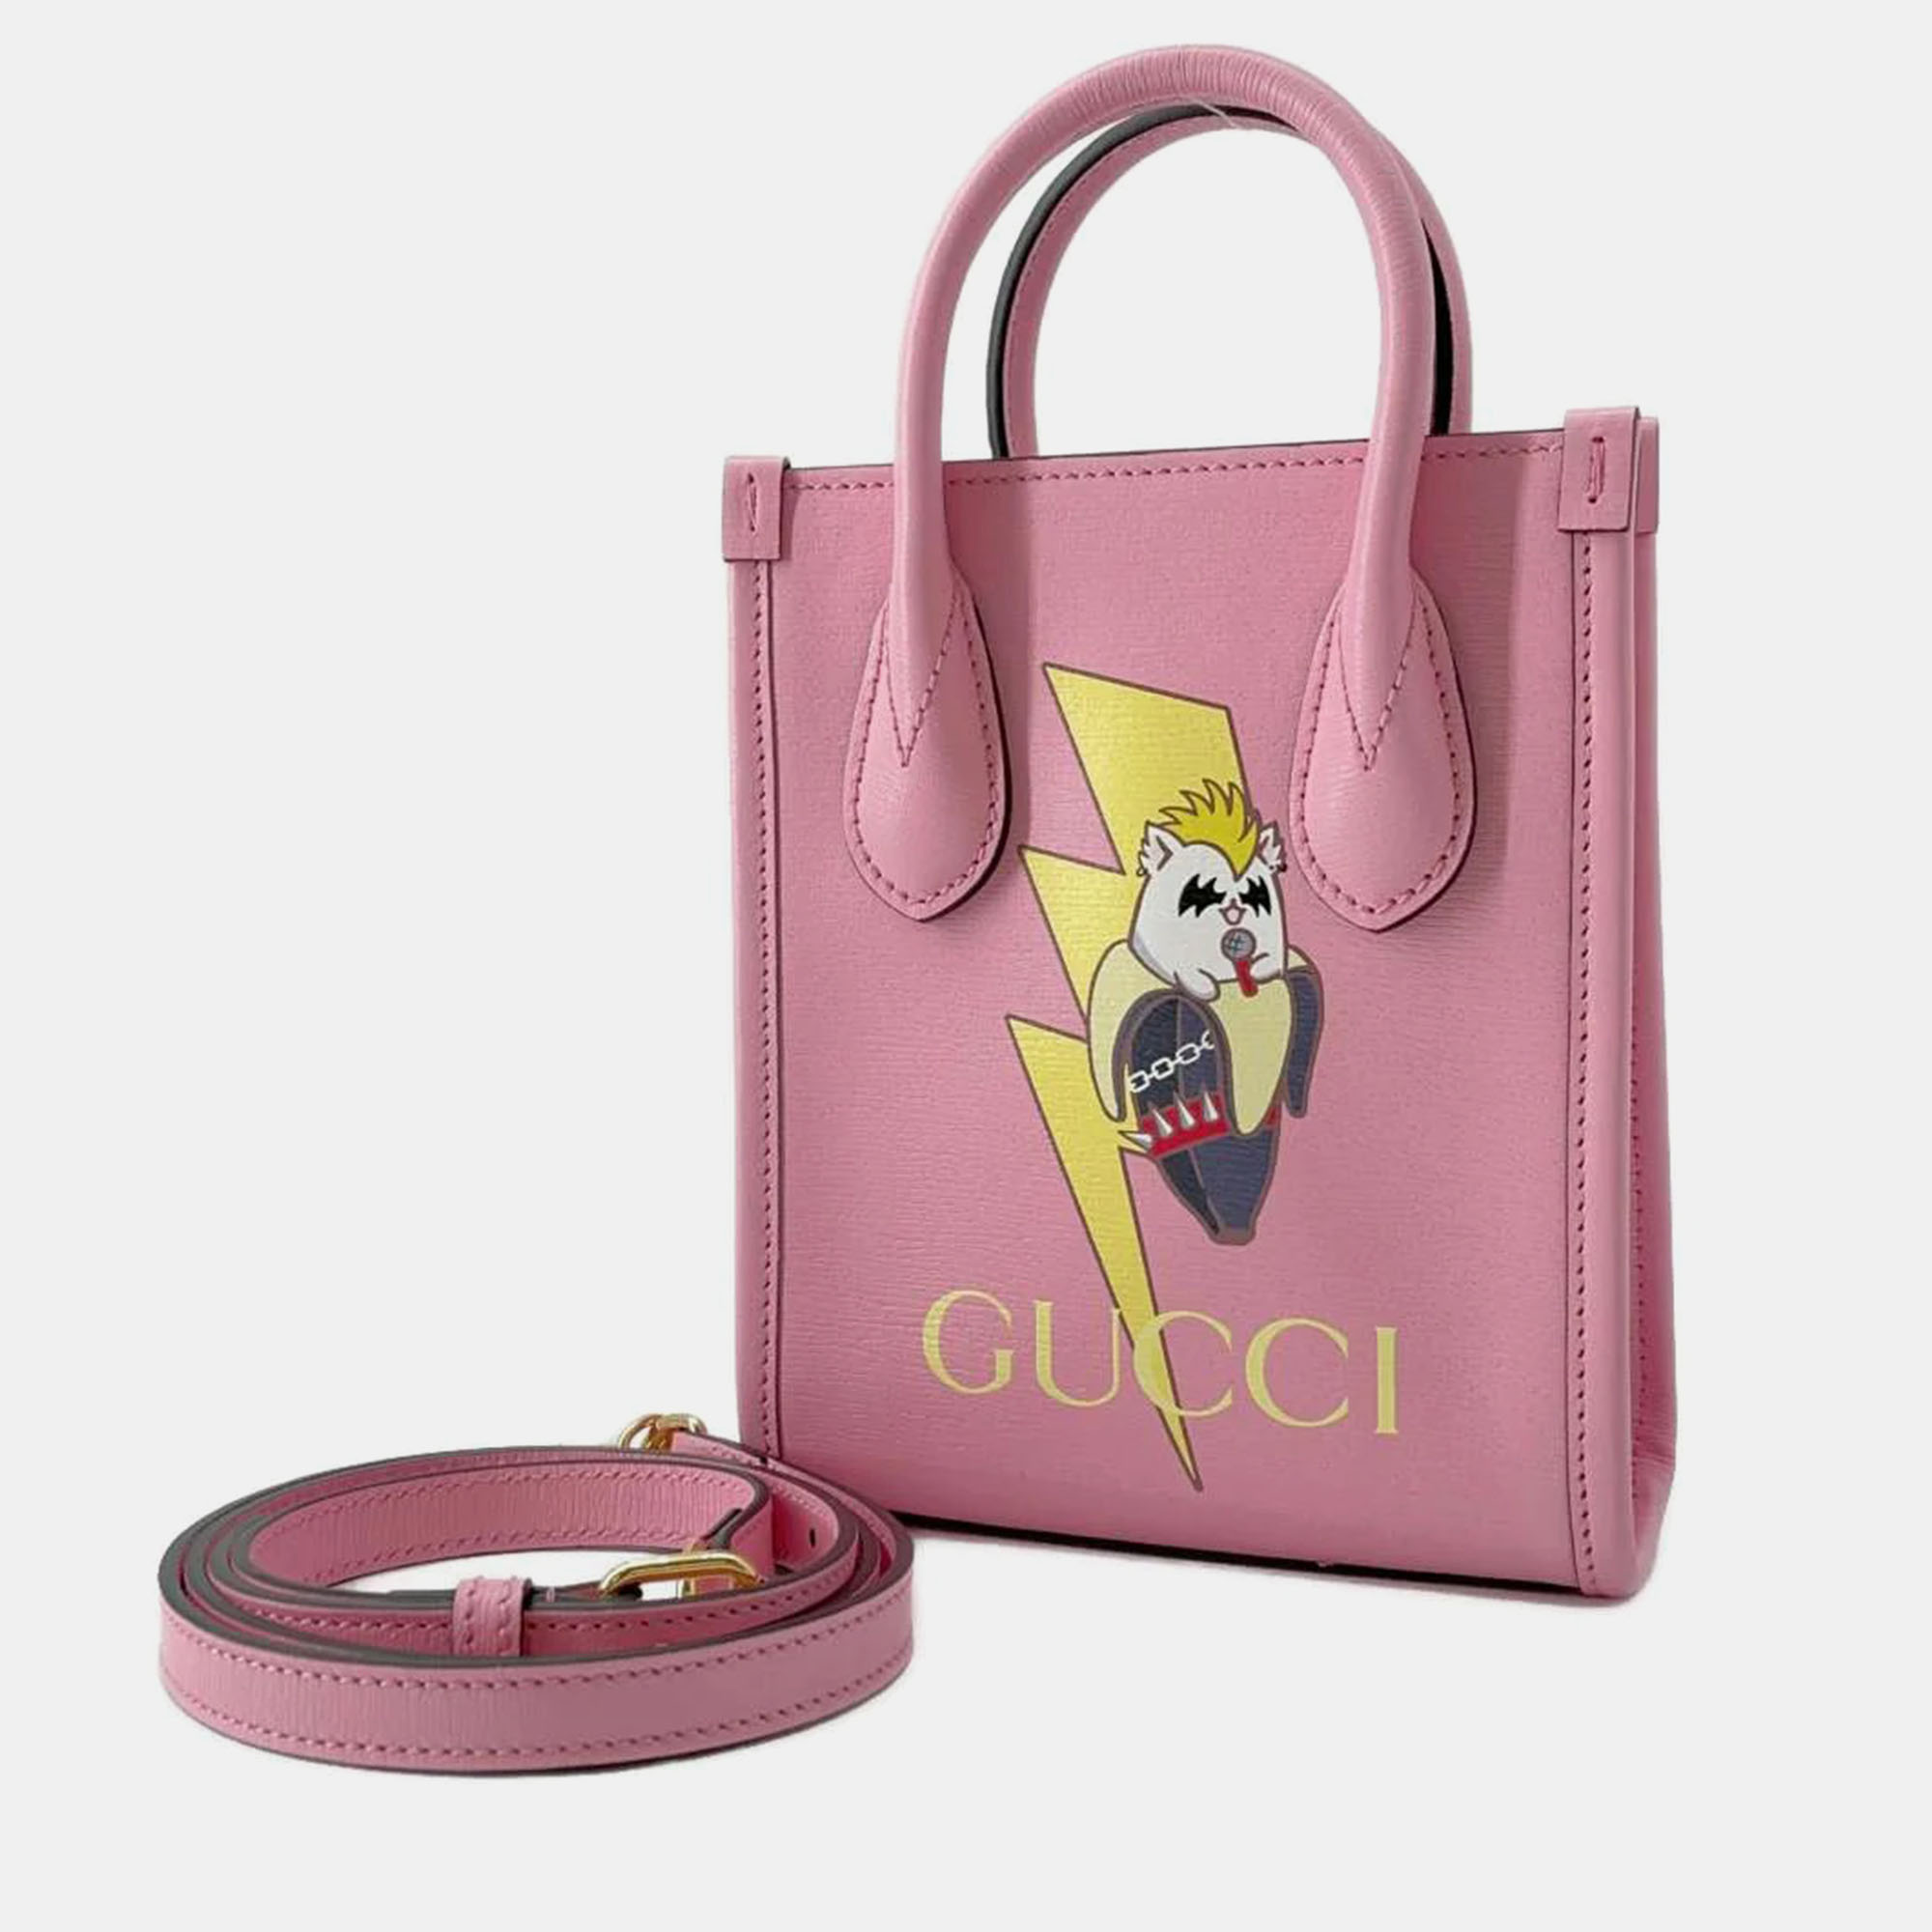 Elevate your every day with this Gucci tote. Meticulously designed it seamlessly blends functionality with luxury offering the perfect accessory to showcase your discerning style while effortlessly carrying your essentials.